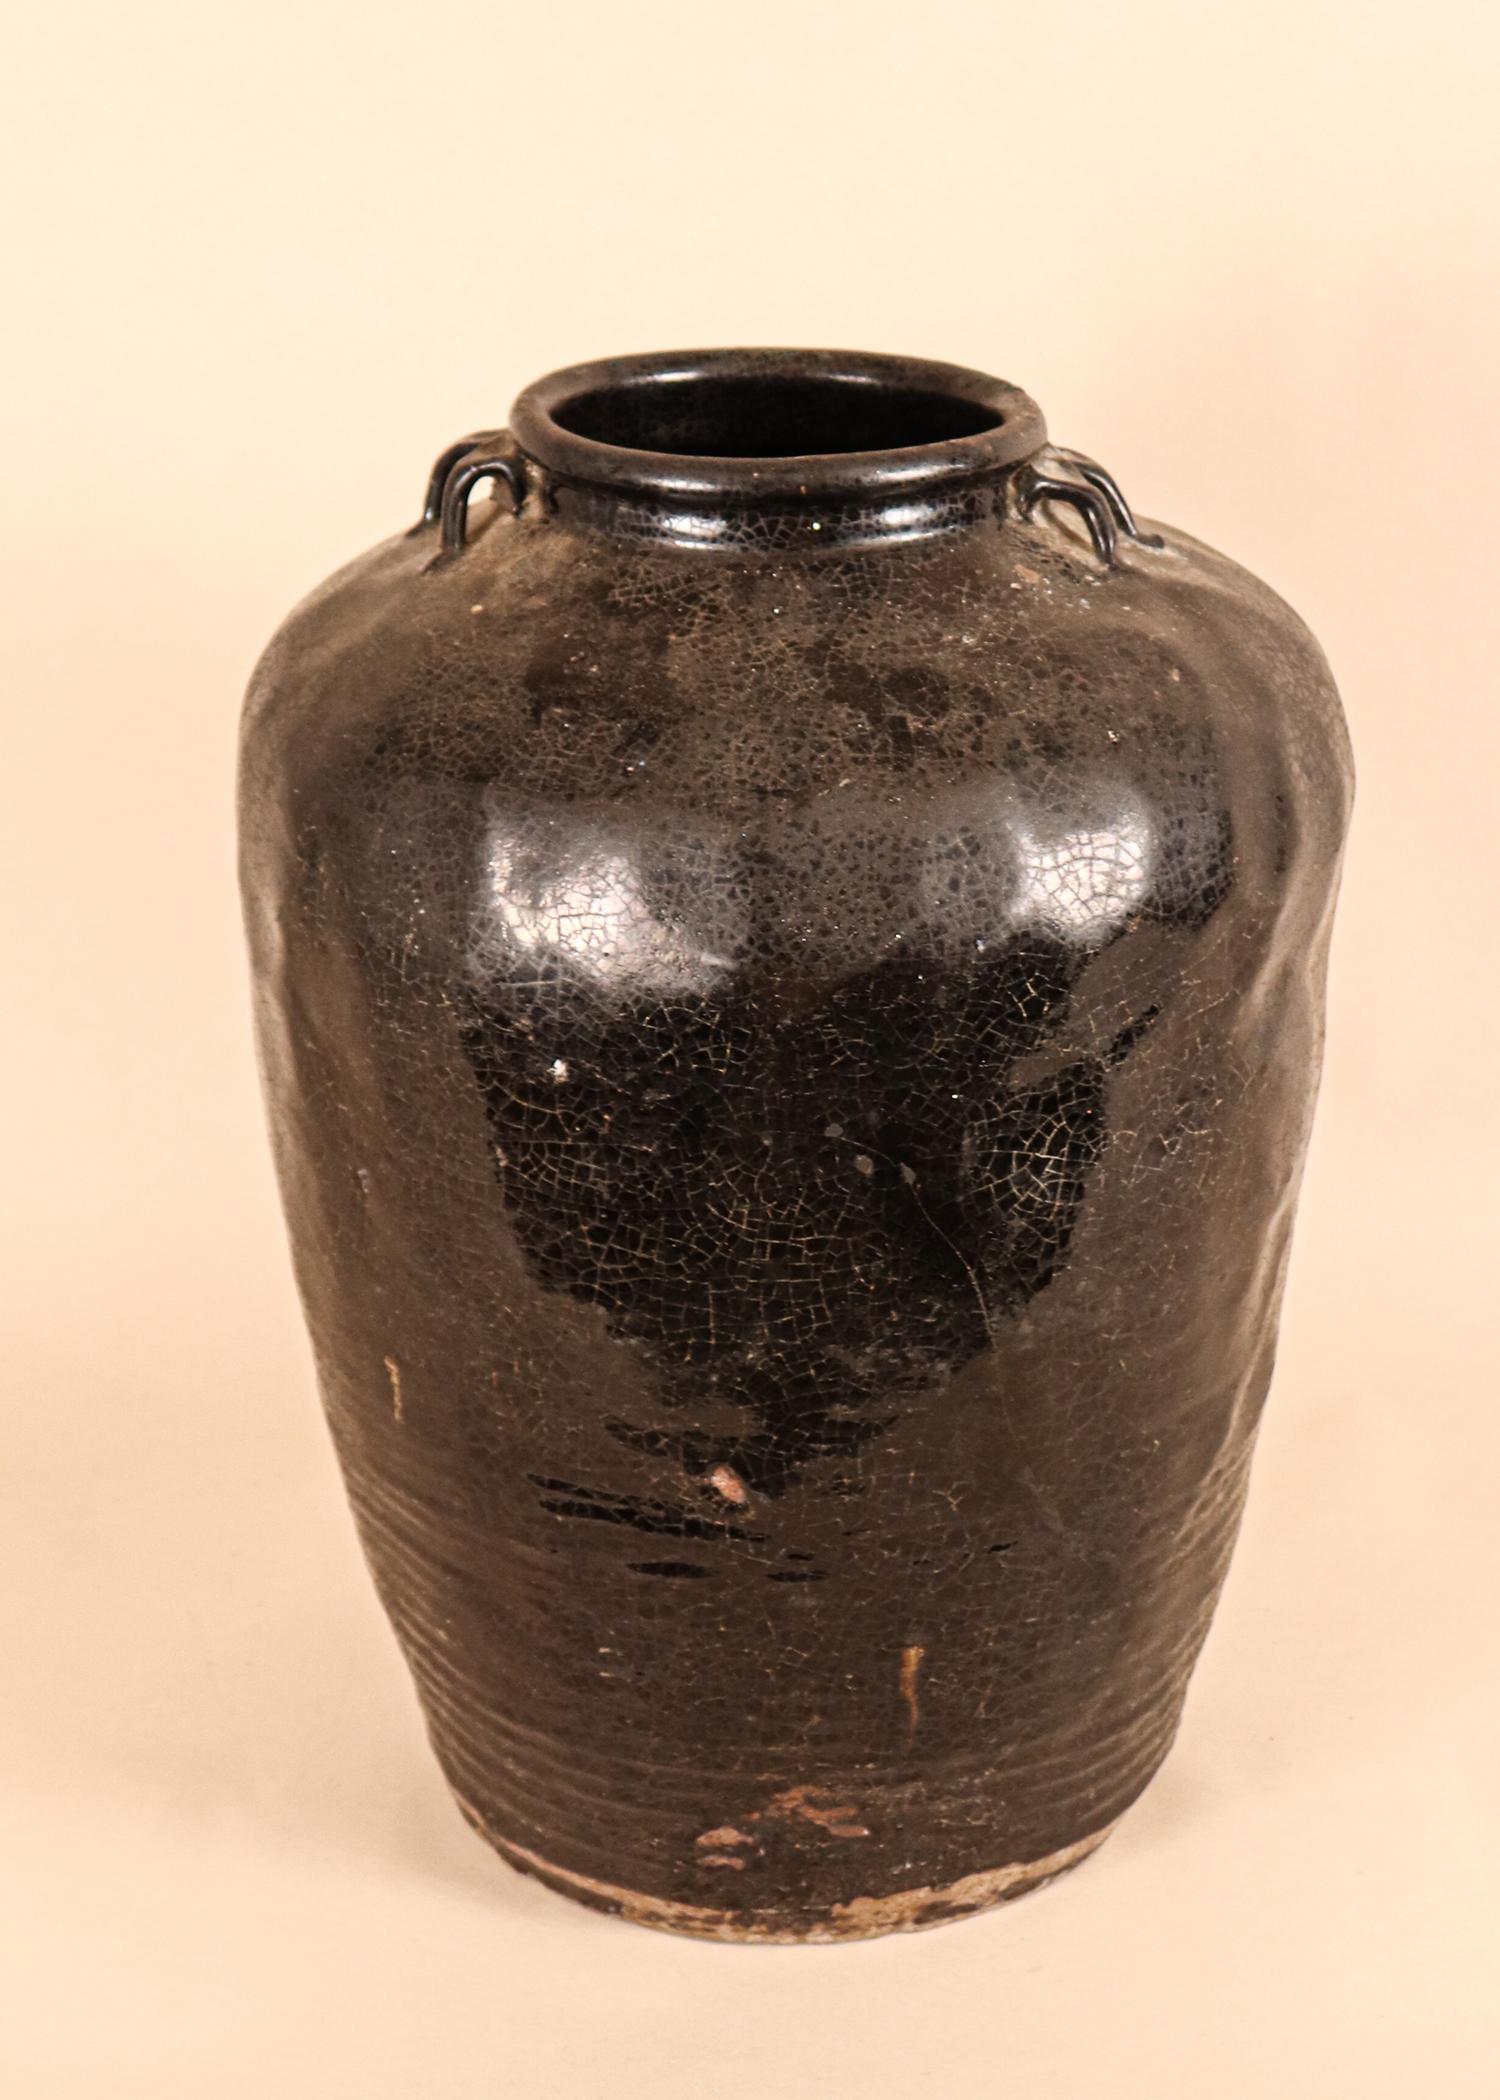 A large, hand built ceramic pot from Kerala, India, circa 1850. This stoneware vessel has a dark black-brown lead glaze with a beautiful, earthen patina. The jar is a perfect marriage of form and function. It was originally used for personal water